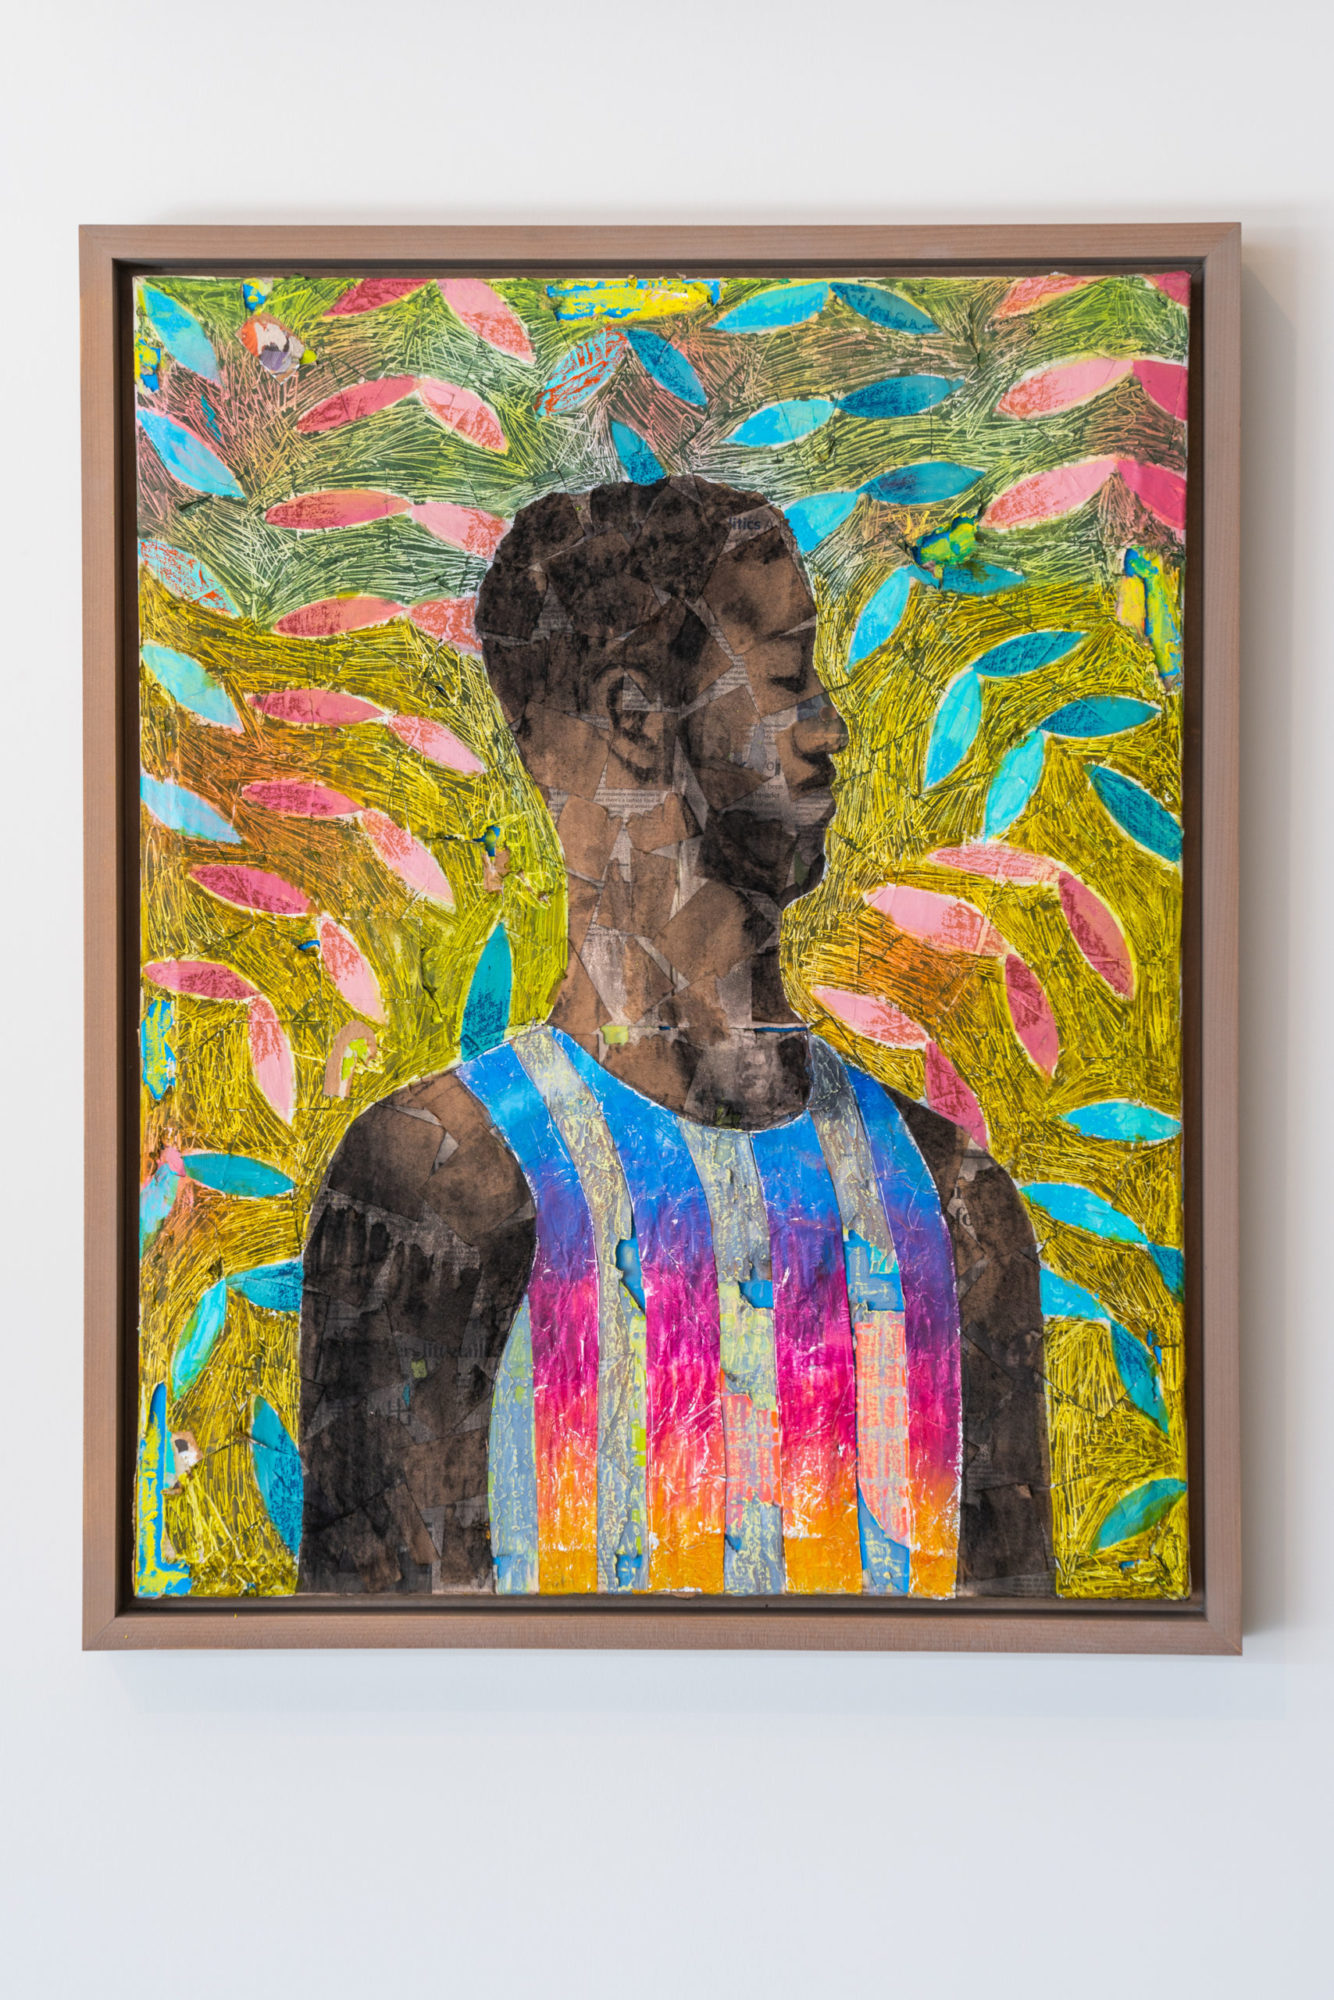 A painting of a Black man framed by a curtain of colorful olive branches. The man is shown in a side-on bust view.